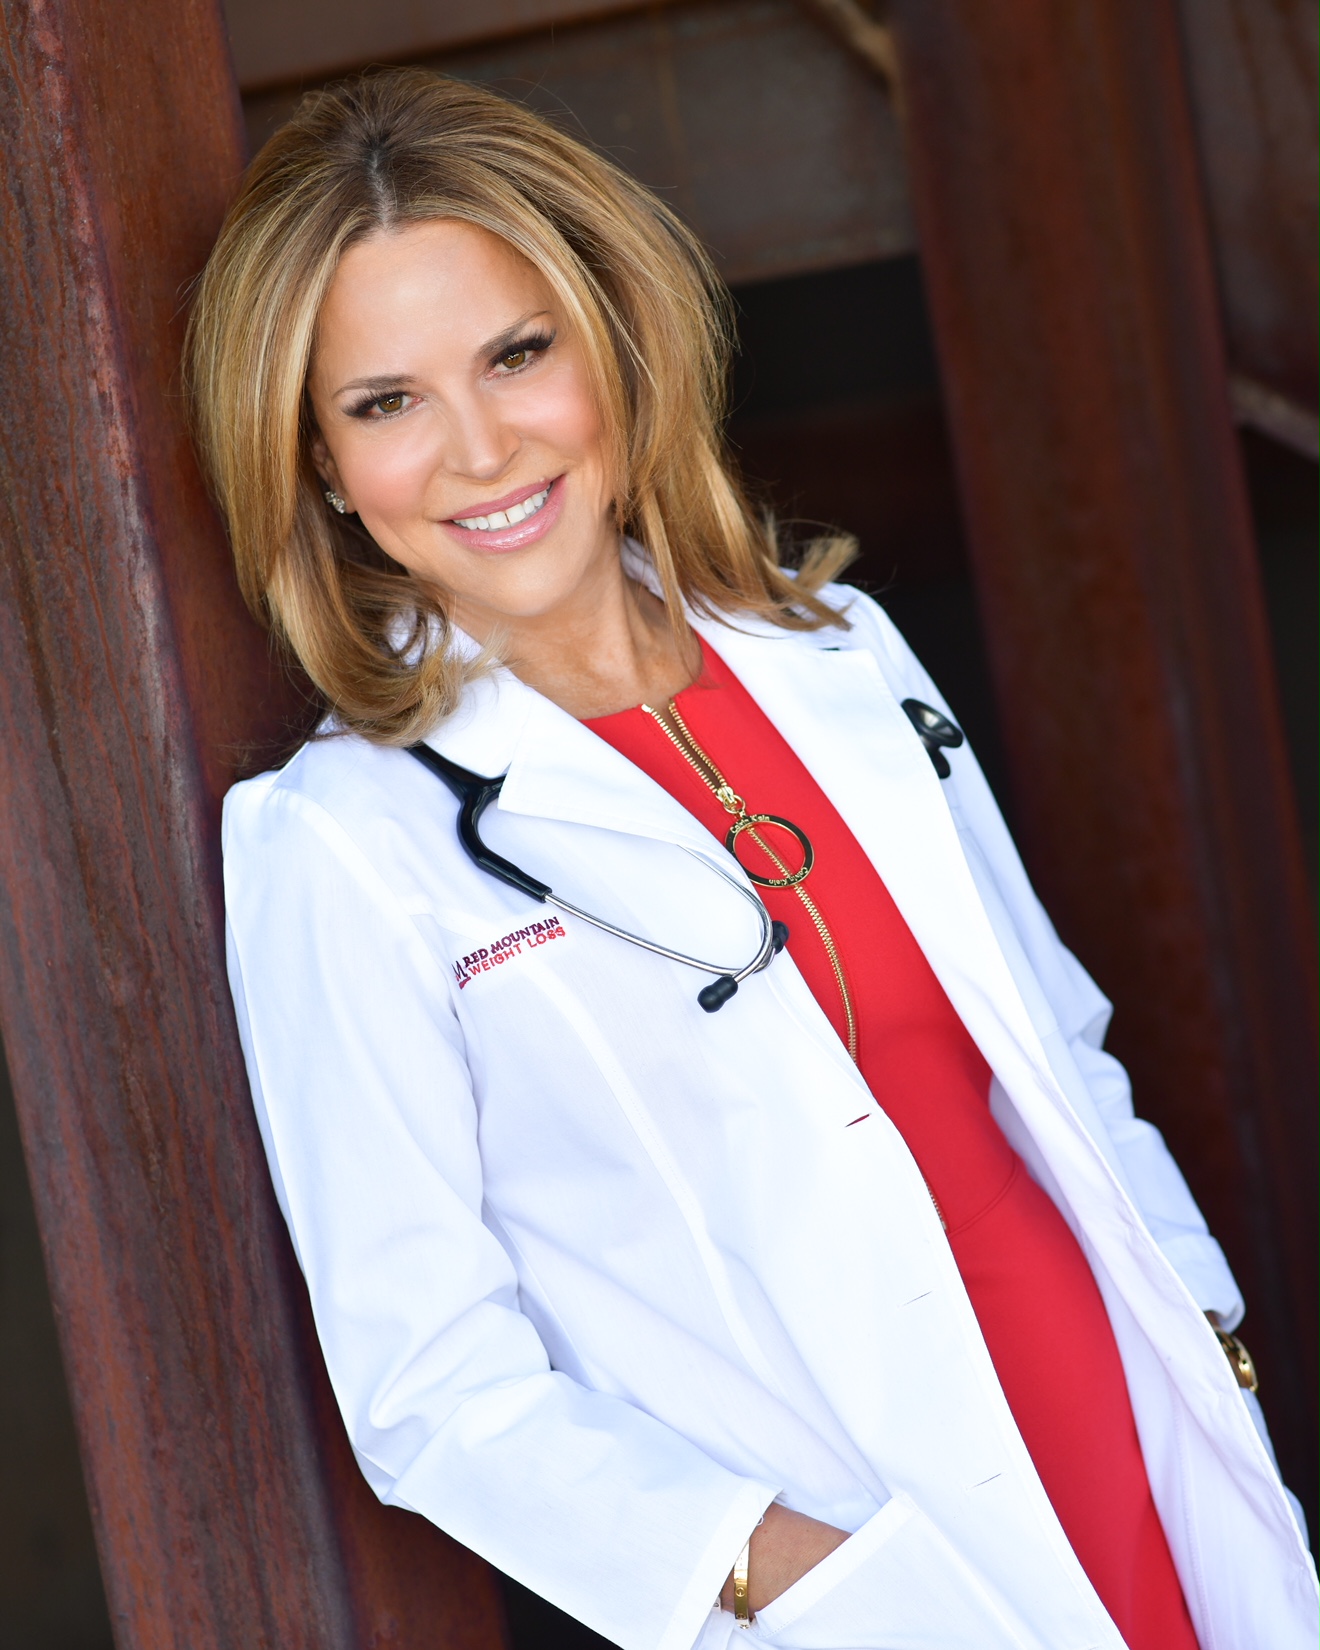 Dr. Suzanne Bentz, Chief Medical Officer and founder, Red Mountain Weight Loss